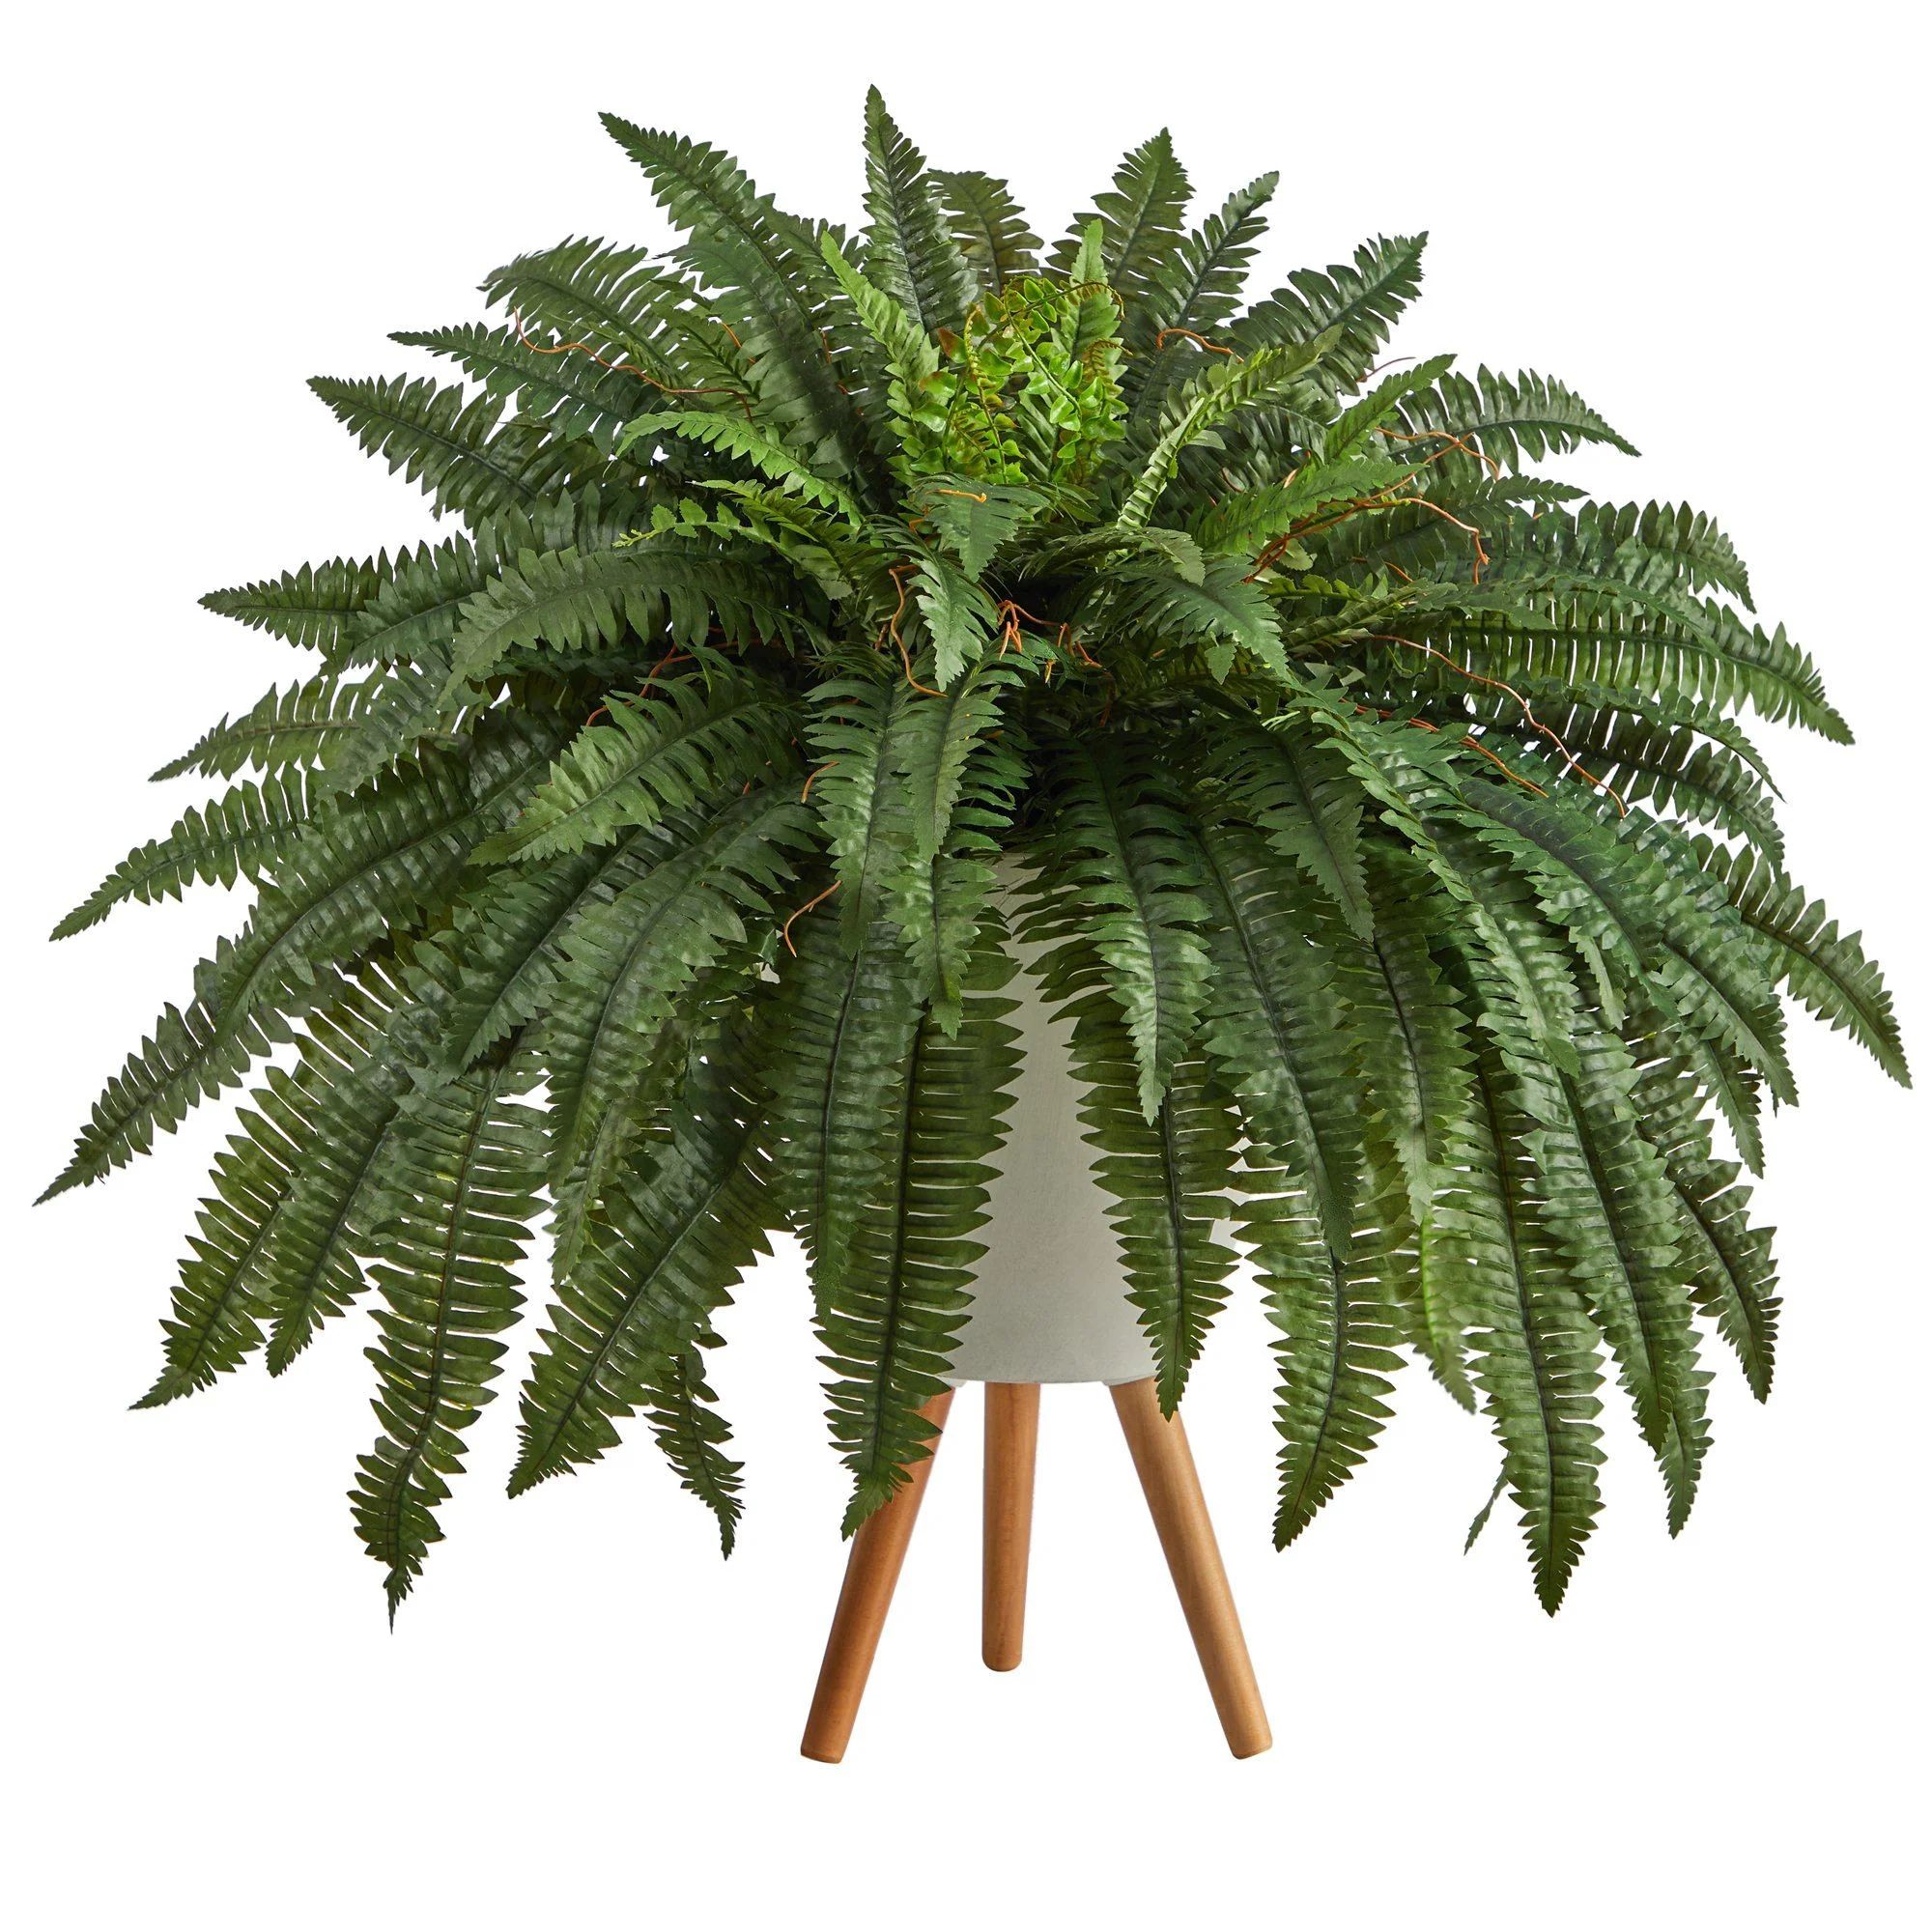 2.5’ Boston Fern Artificial Plant in White Planter with Legs | Nearly Natural